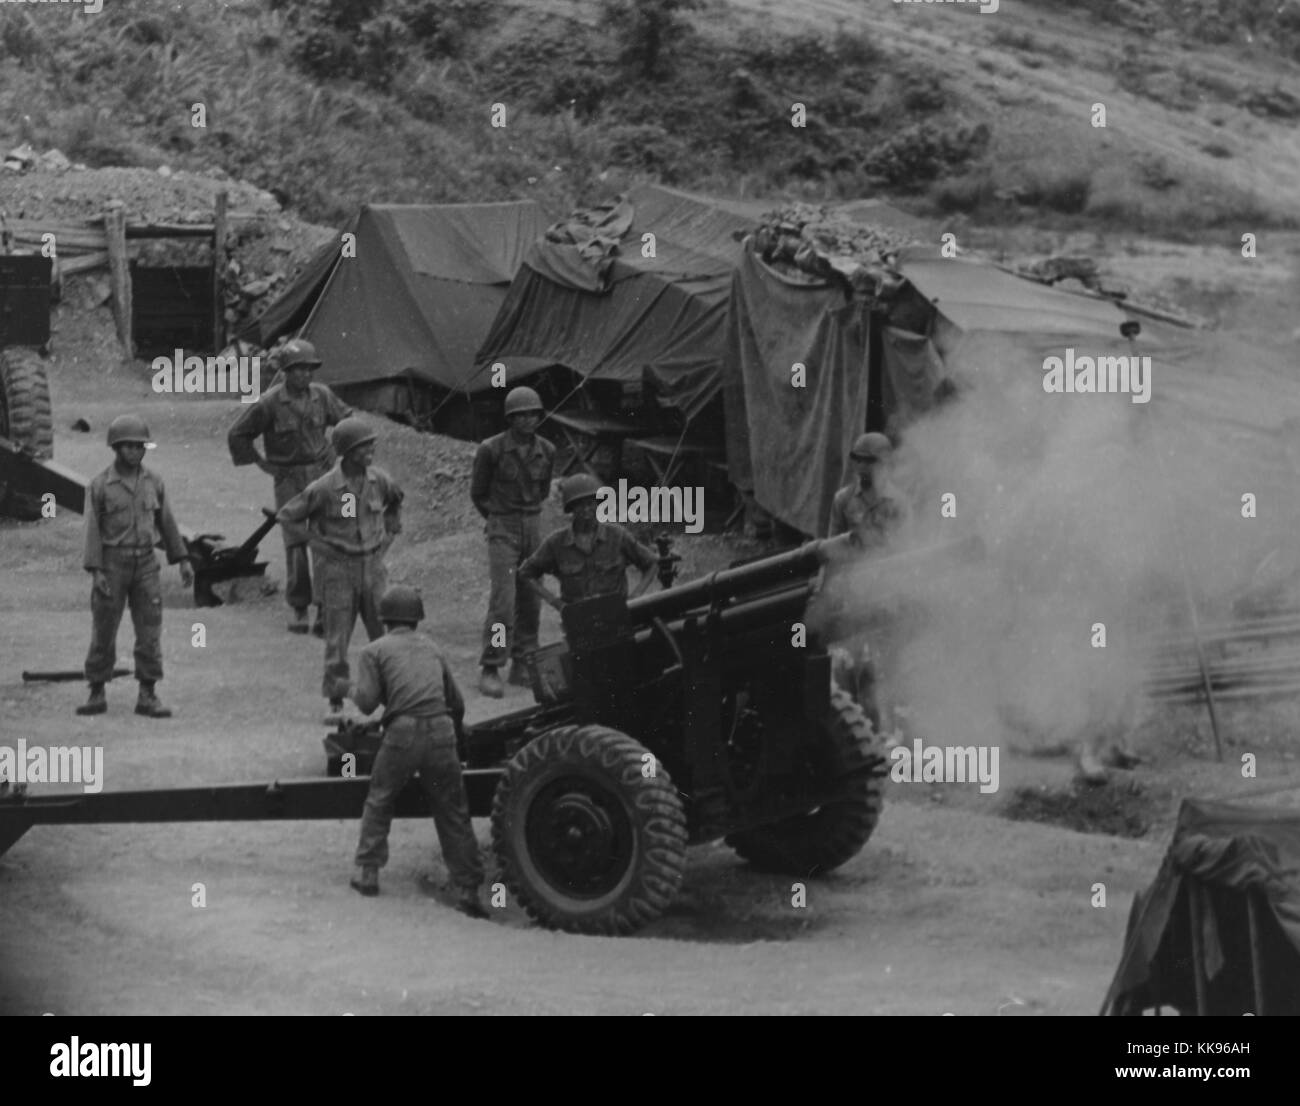 Black and white photograph of a group of Vietnamese artillerymen firing from a mountain position during field training, tents in the background, 1962. From the New York Public Library. Stock Photo